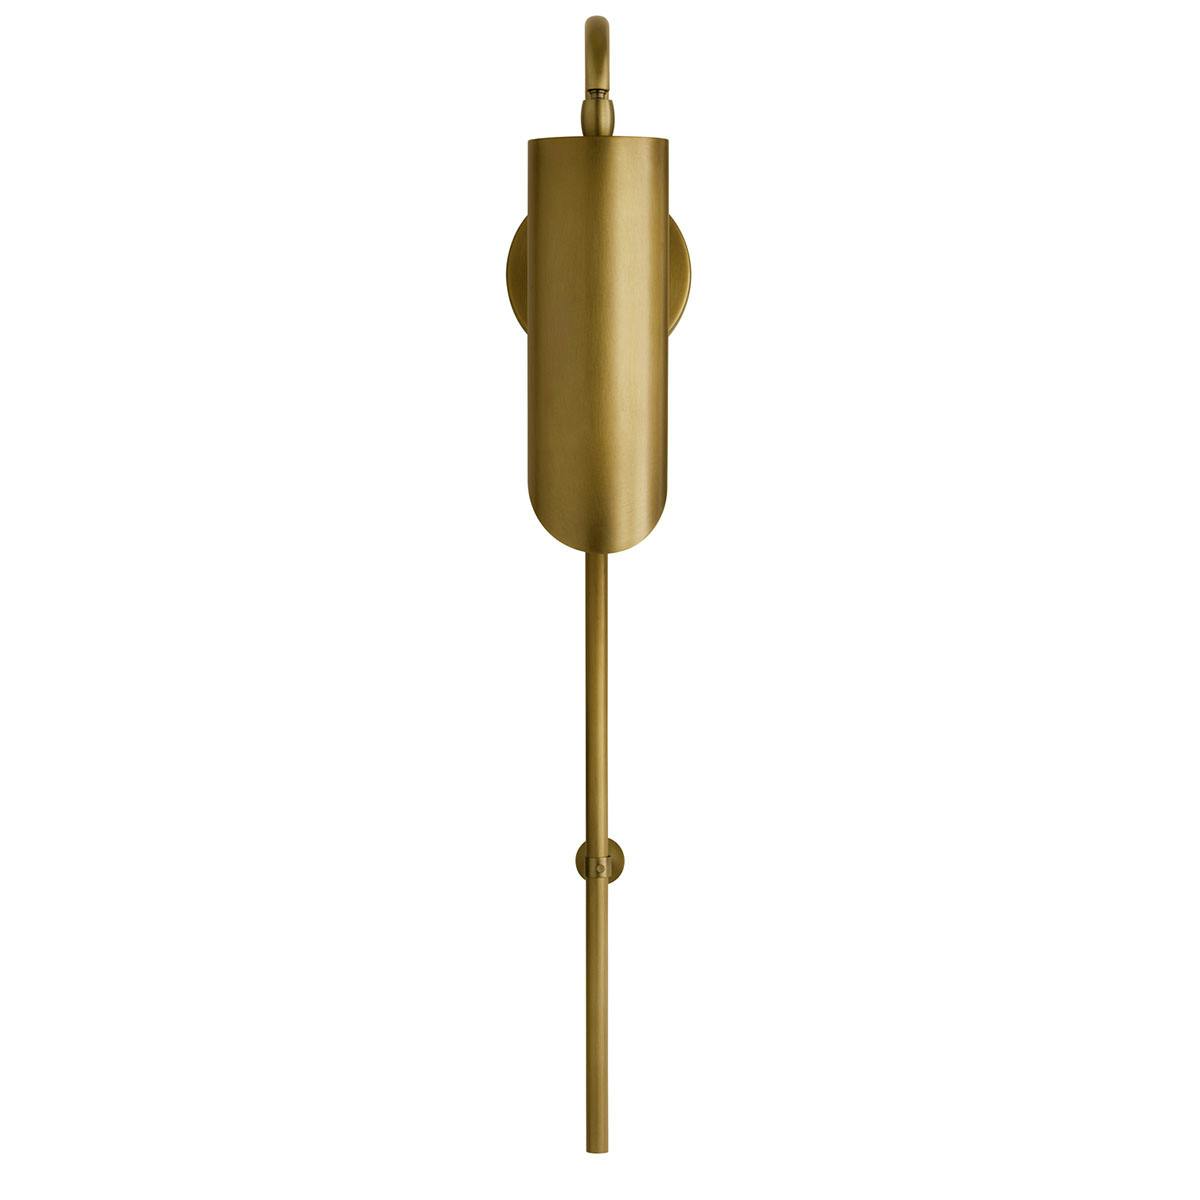 Front view of the Trentino 1 Light Sconce Natural Brass on a white background